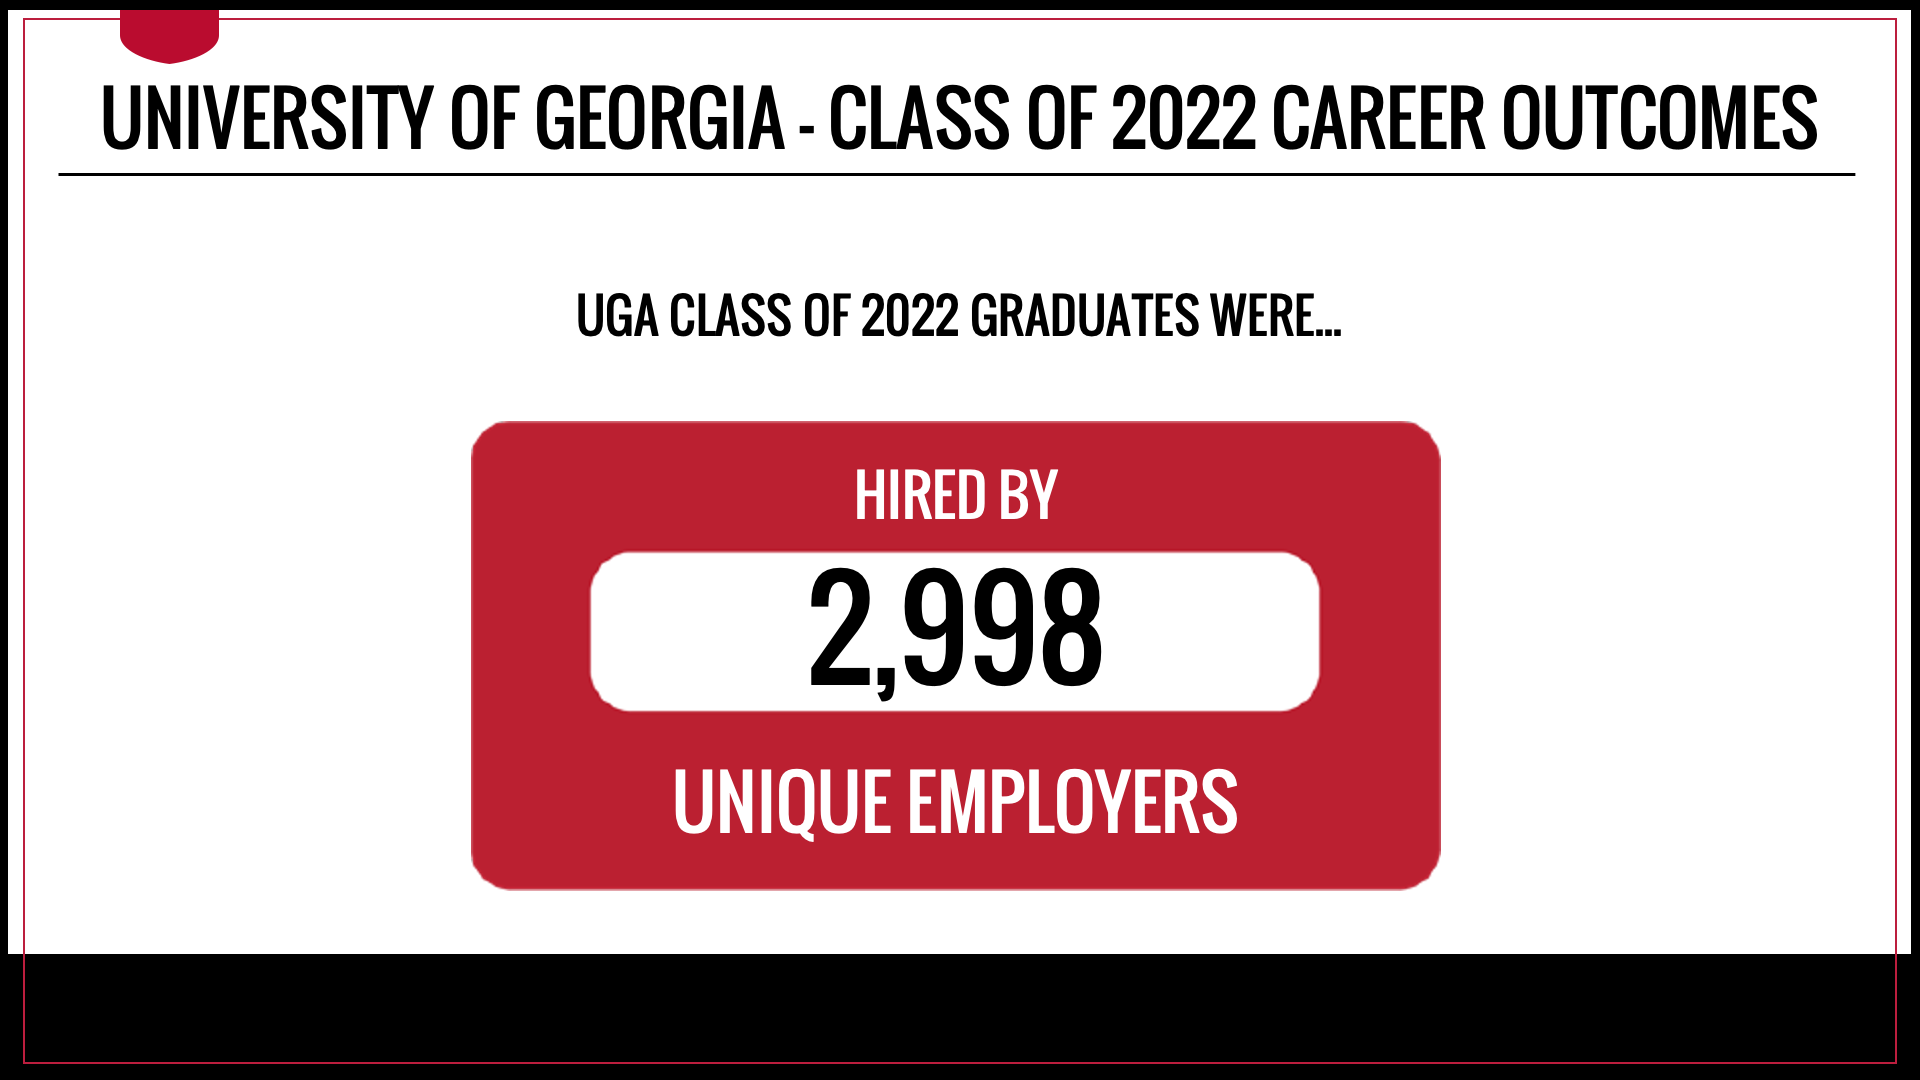 Class of 2022 graduates have been hired by 2998 unique employers